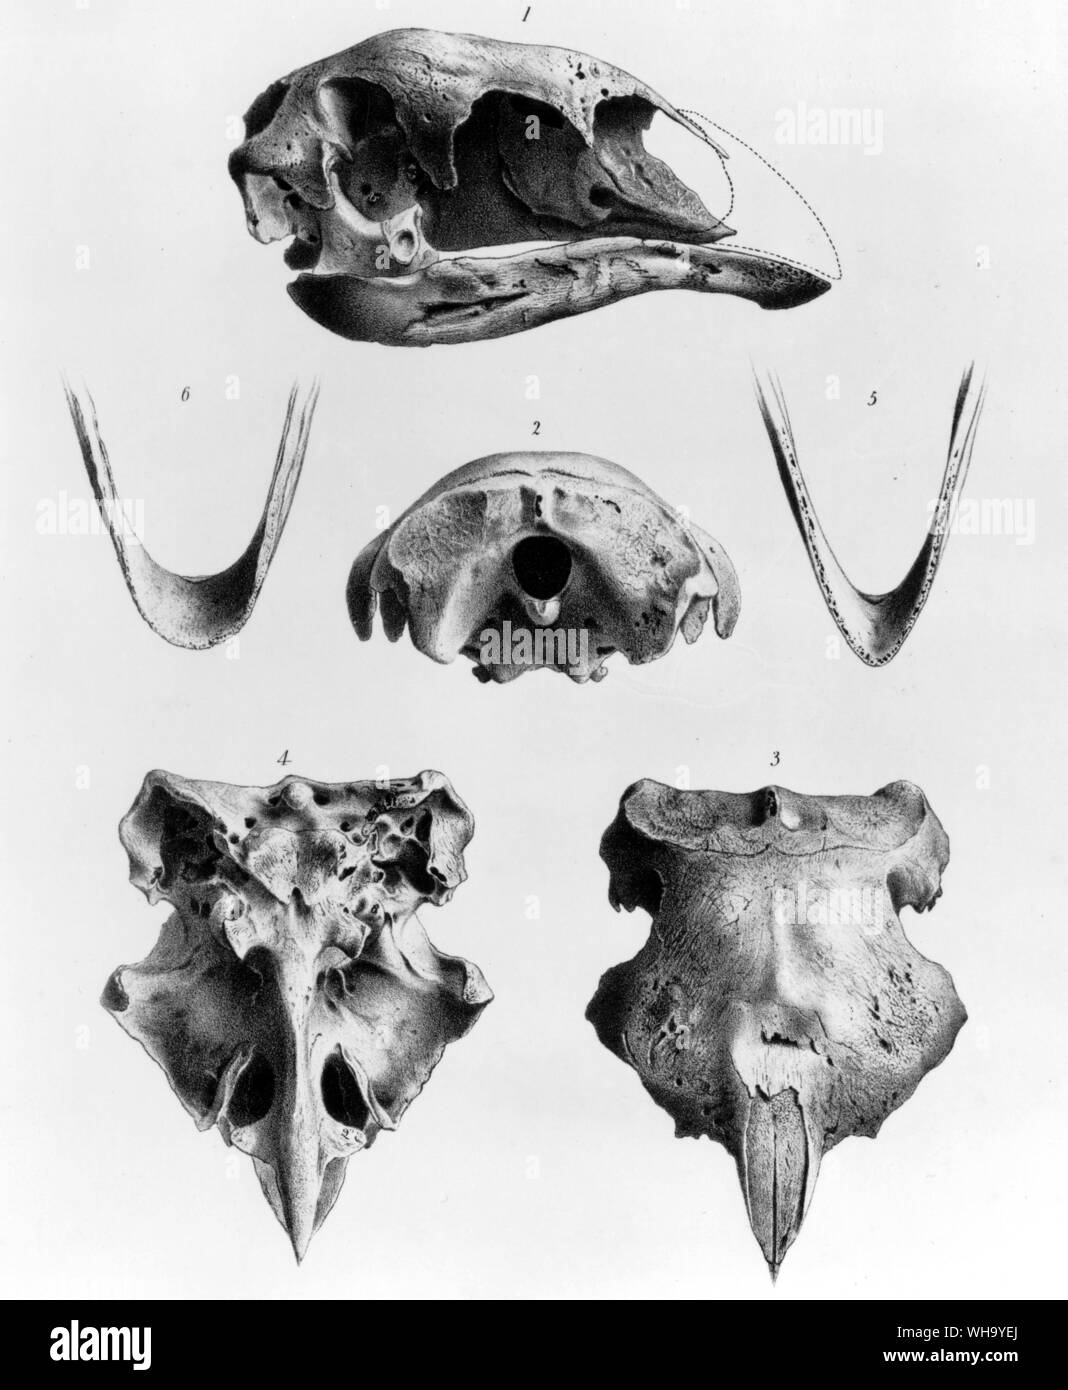 Skull of the Greater Broad-billed Moa. Lithograph by Joseph Smit from the Transactions of the Zoological Society of London. Vol. 7 (1870), Pl.14 - Height of bird 190cm (6ft) Stock Photo